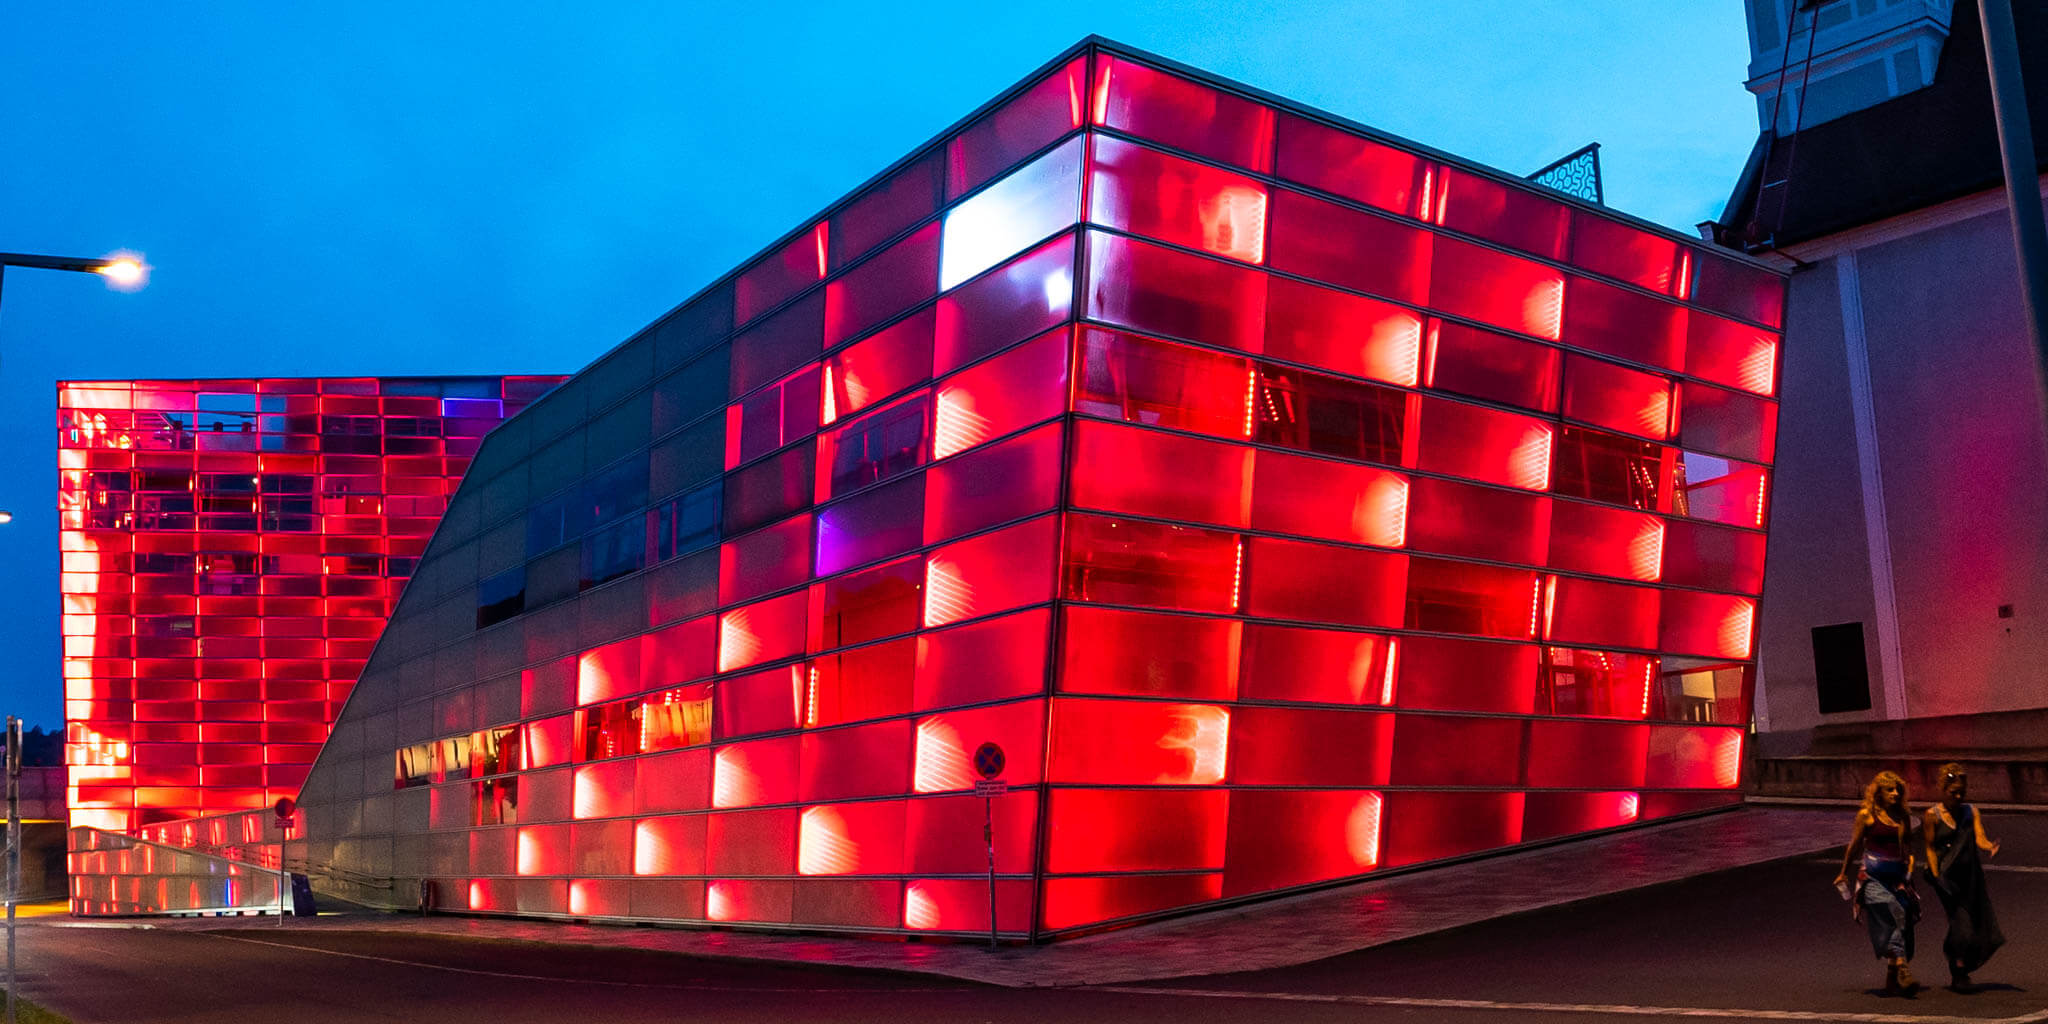 Play the façade! 5,100 square meters Ars Electronica façade are a medium of its own: Connect to the building to audiovisually design 38,500 LEDs and play your favorite music over the audio system.